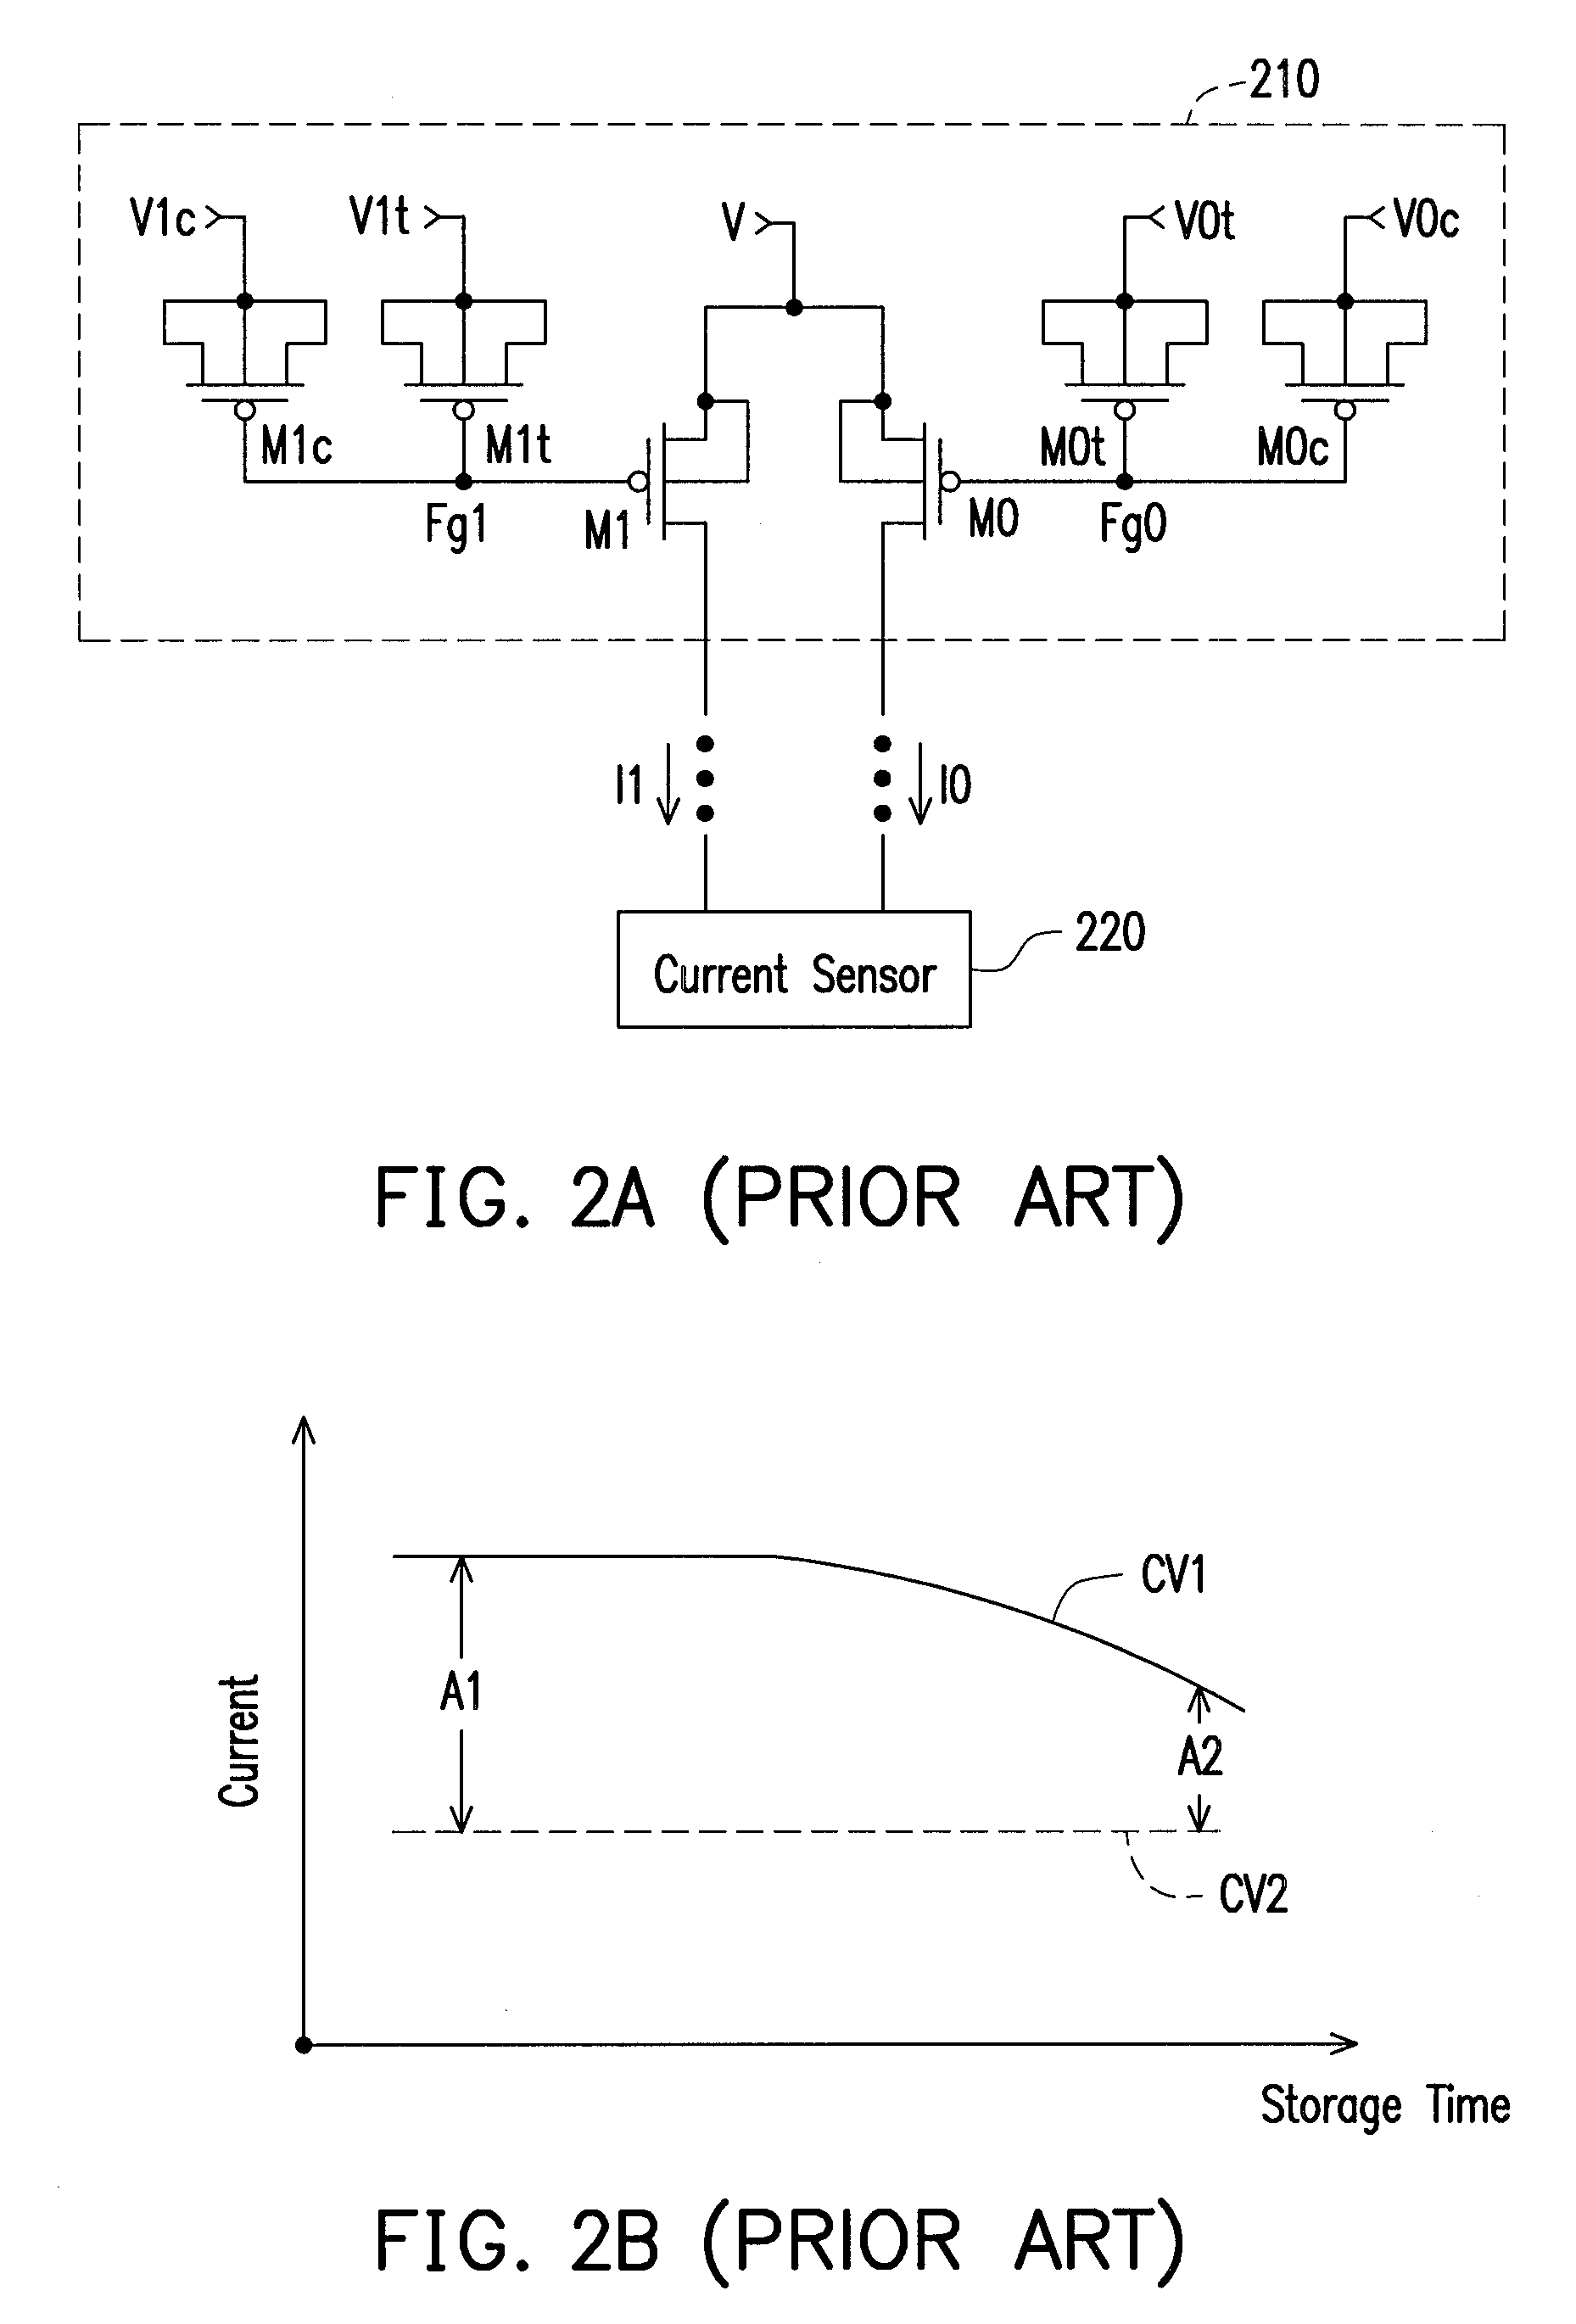 Non-volatile memory unit cell with improved sensing margin and reliability